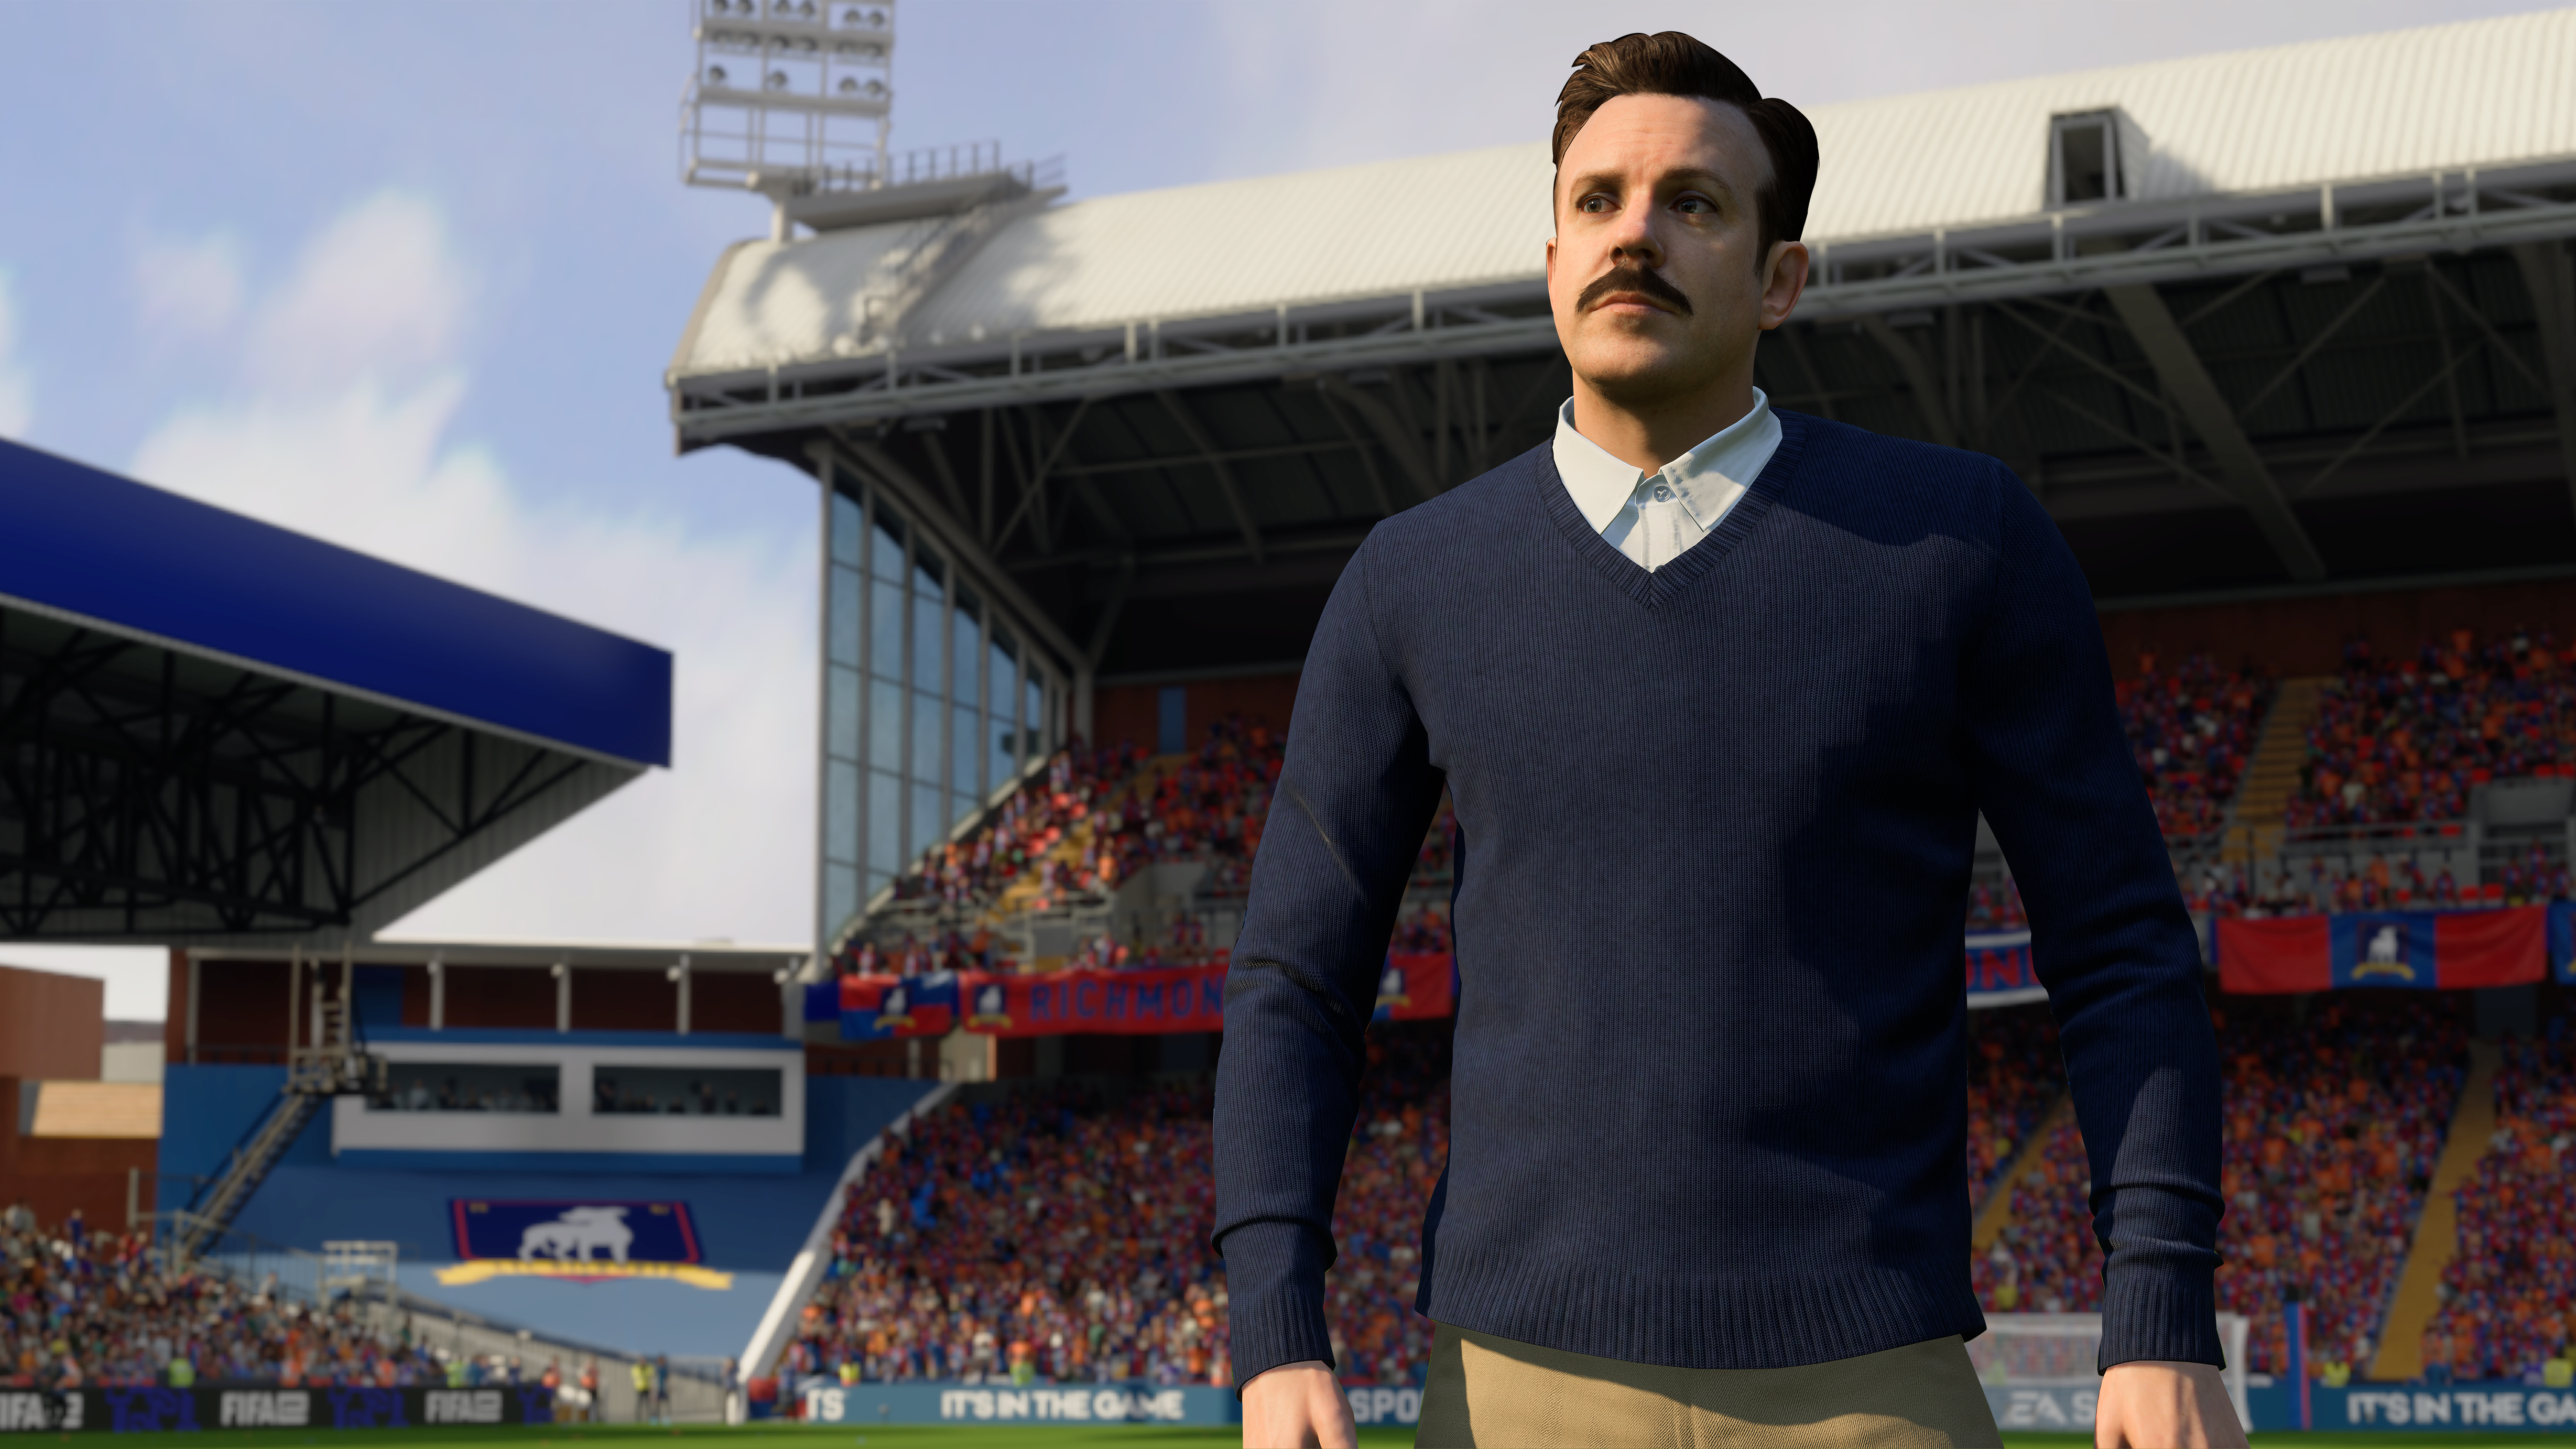 Fifa manager 23 mod